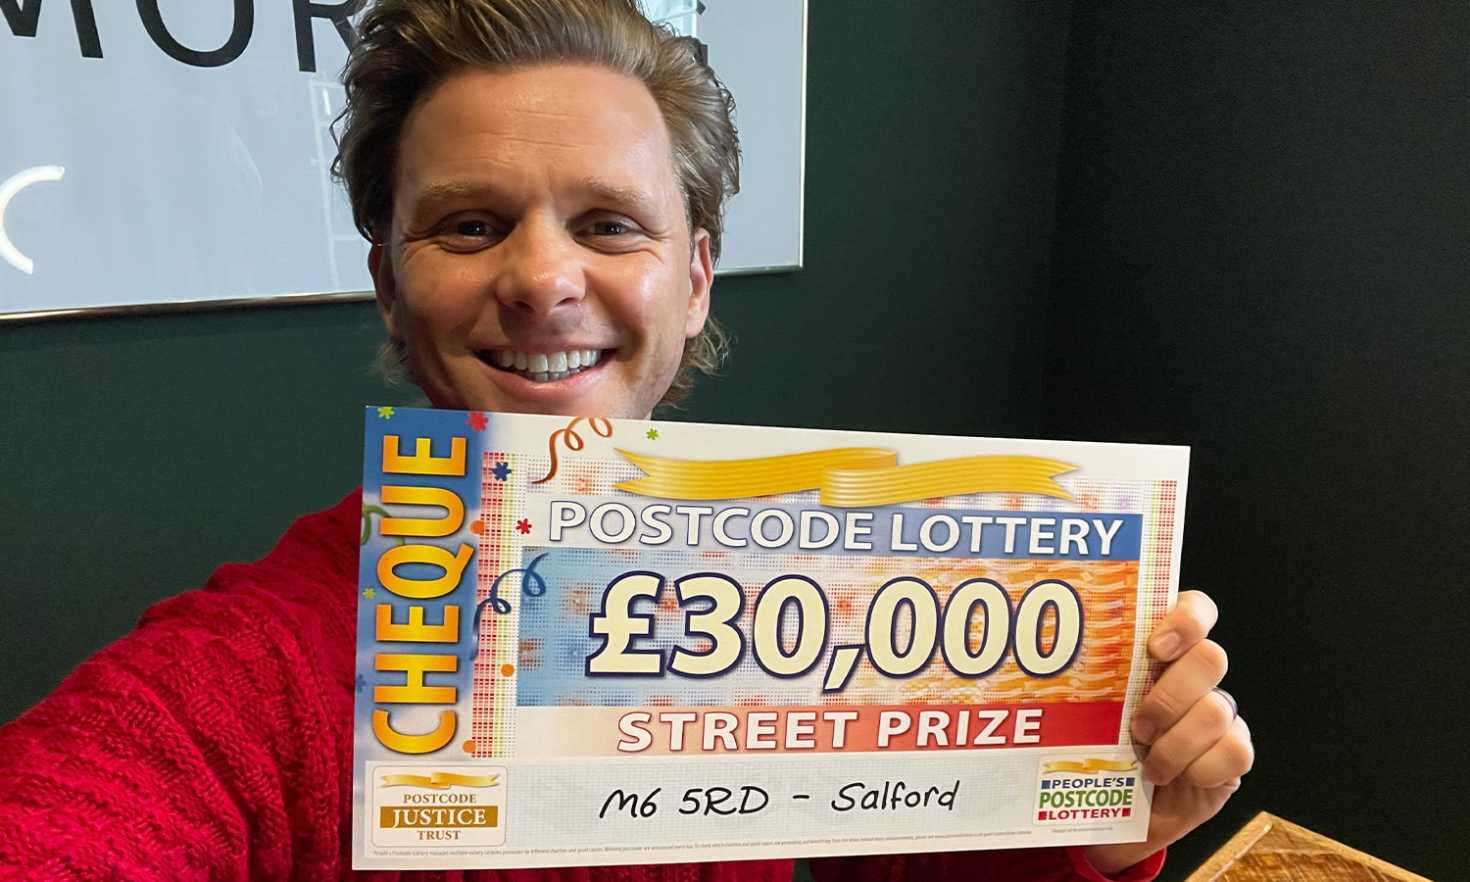 Today's £30,000 Street Prizes are going to two lucky winners in Salford